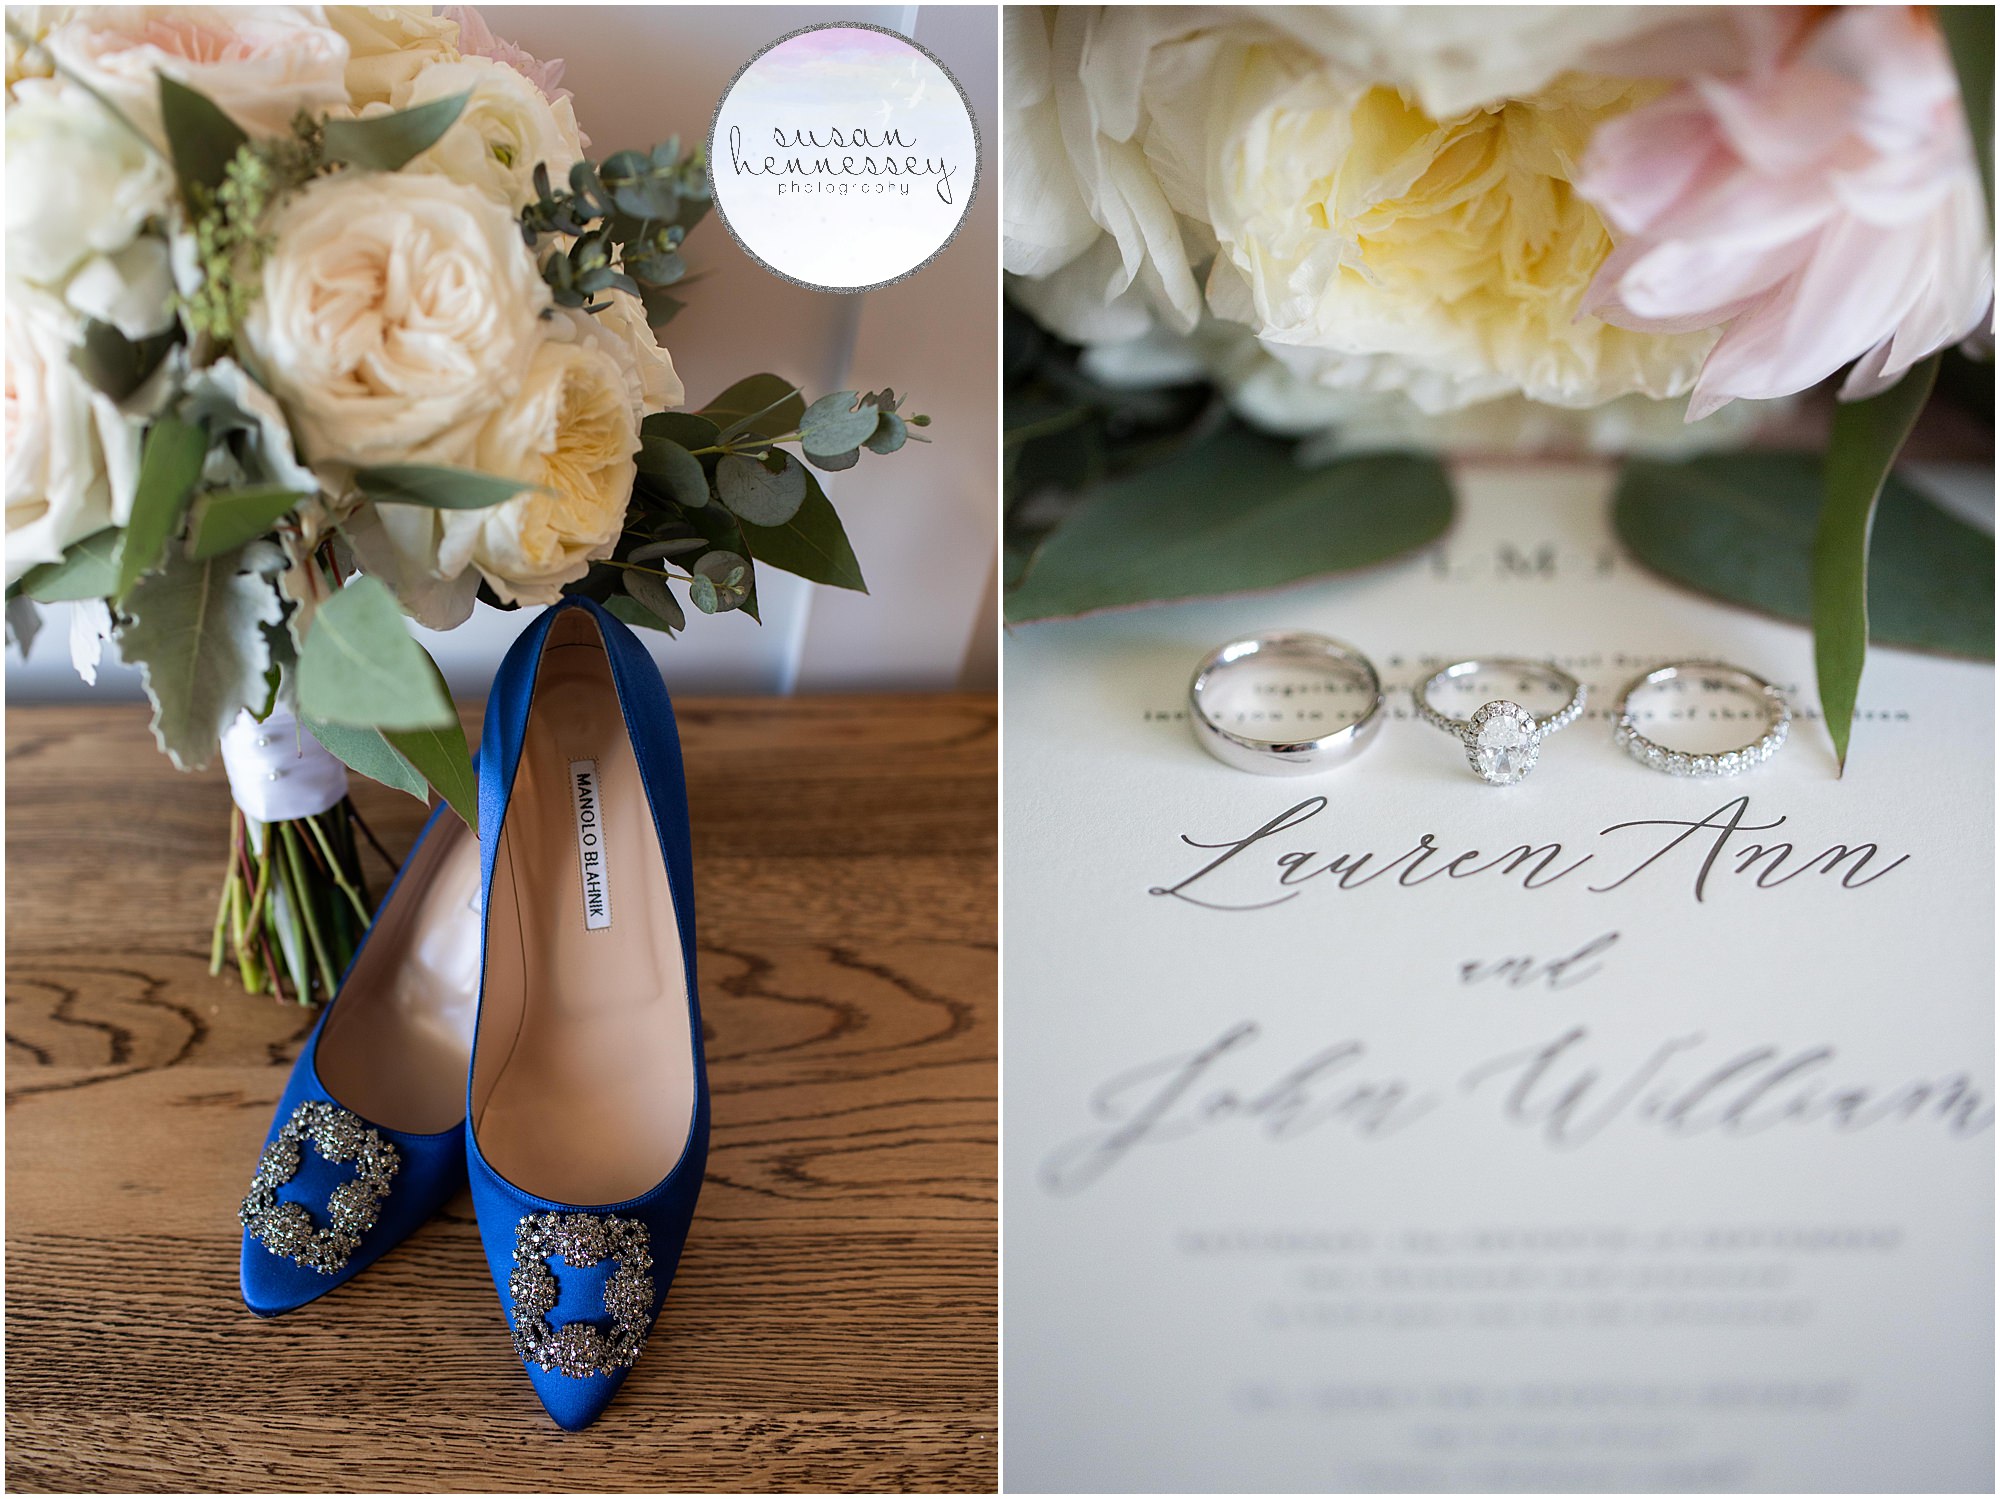 manolo blahnik shoes and elegant invitation suite for rehoboth beach country club wedding